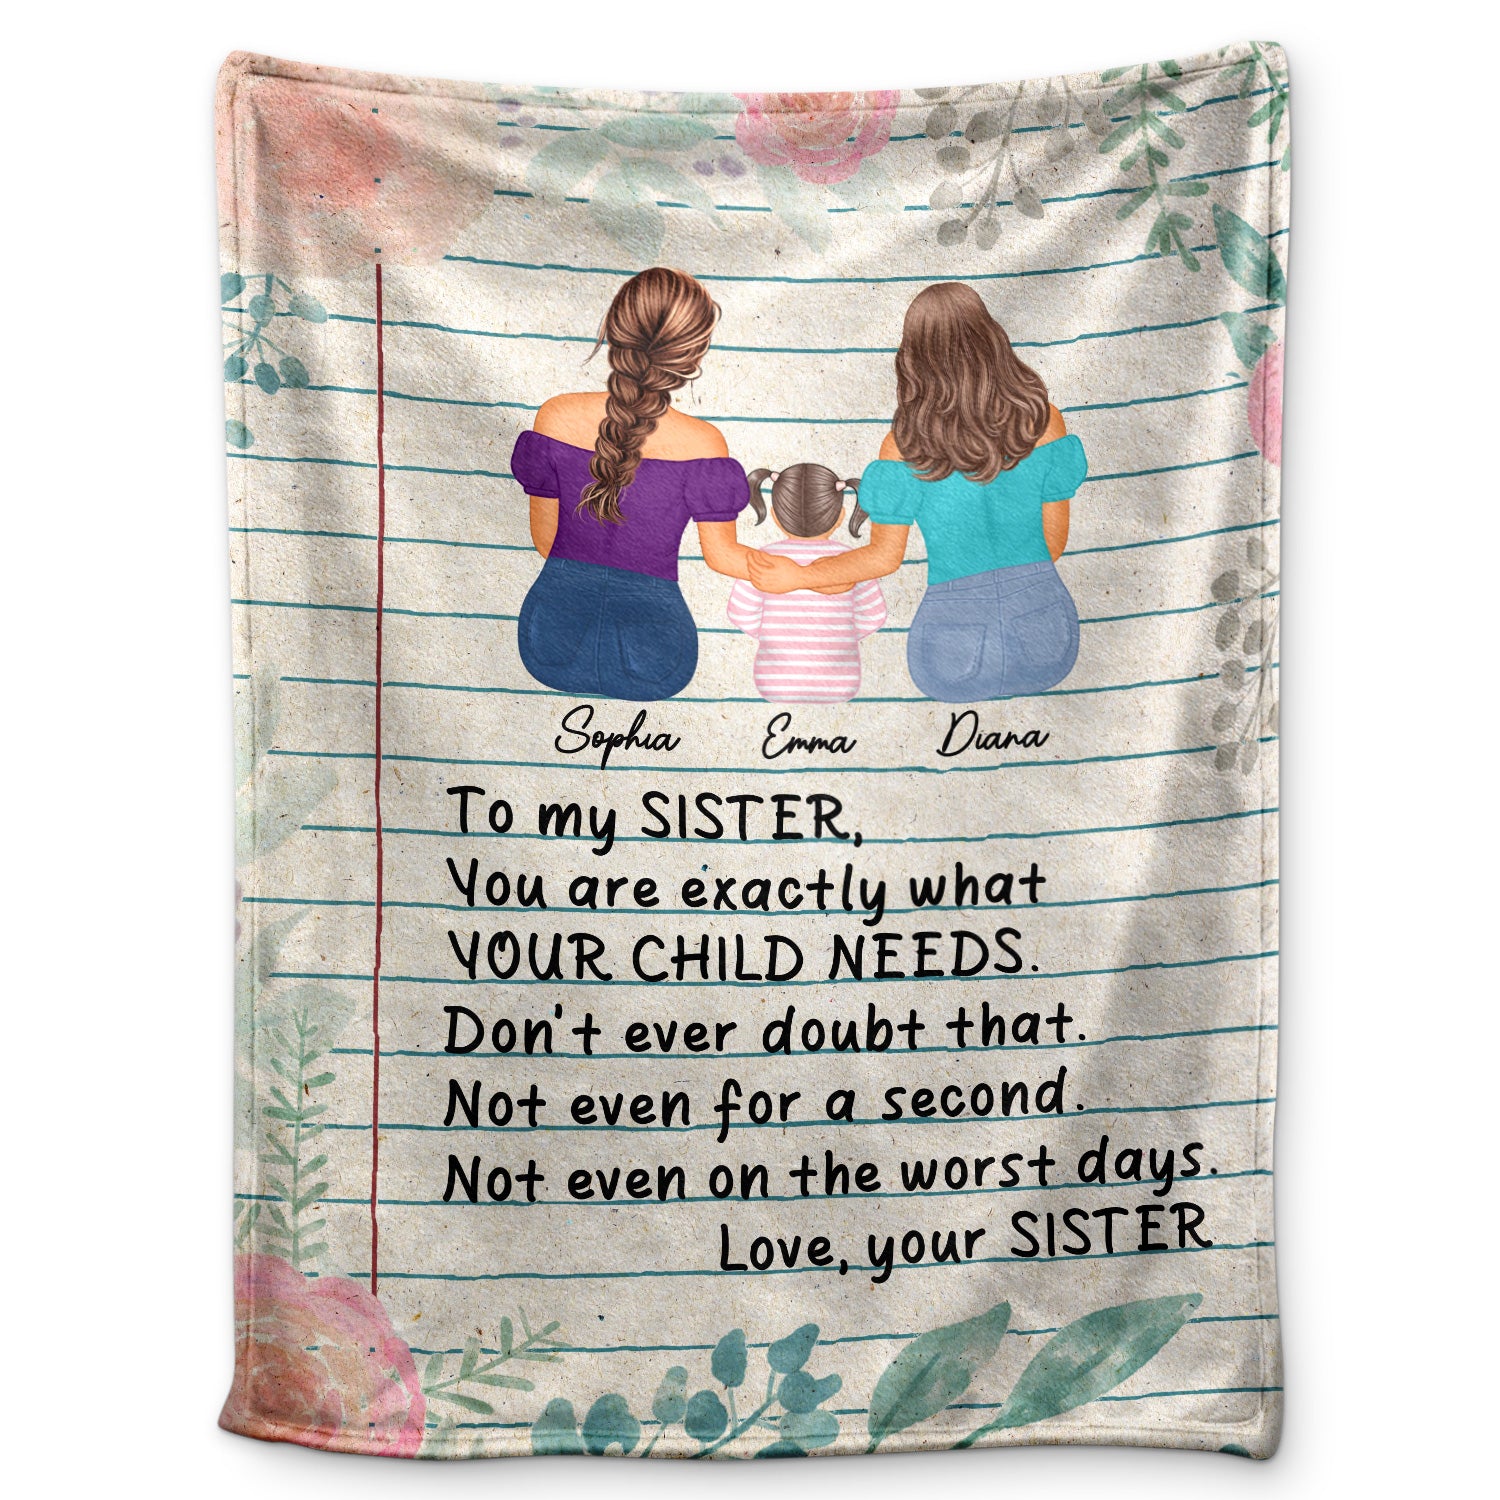 Don't Ever Doubt - Gift For Young Mother Sister - Personalized Fleece Blanket, Sherpa Blanket